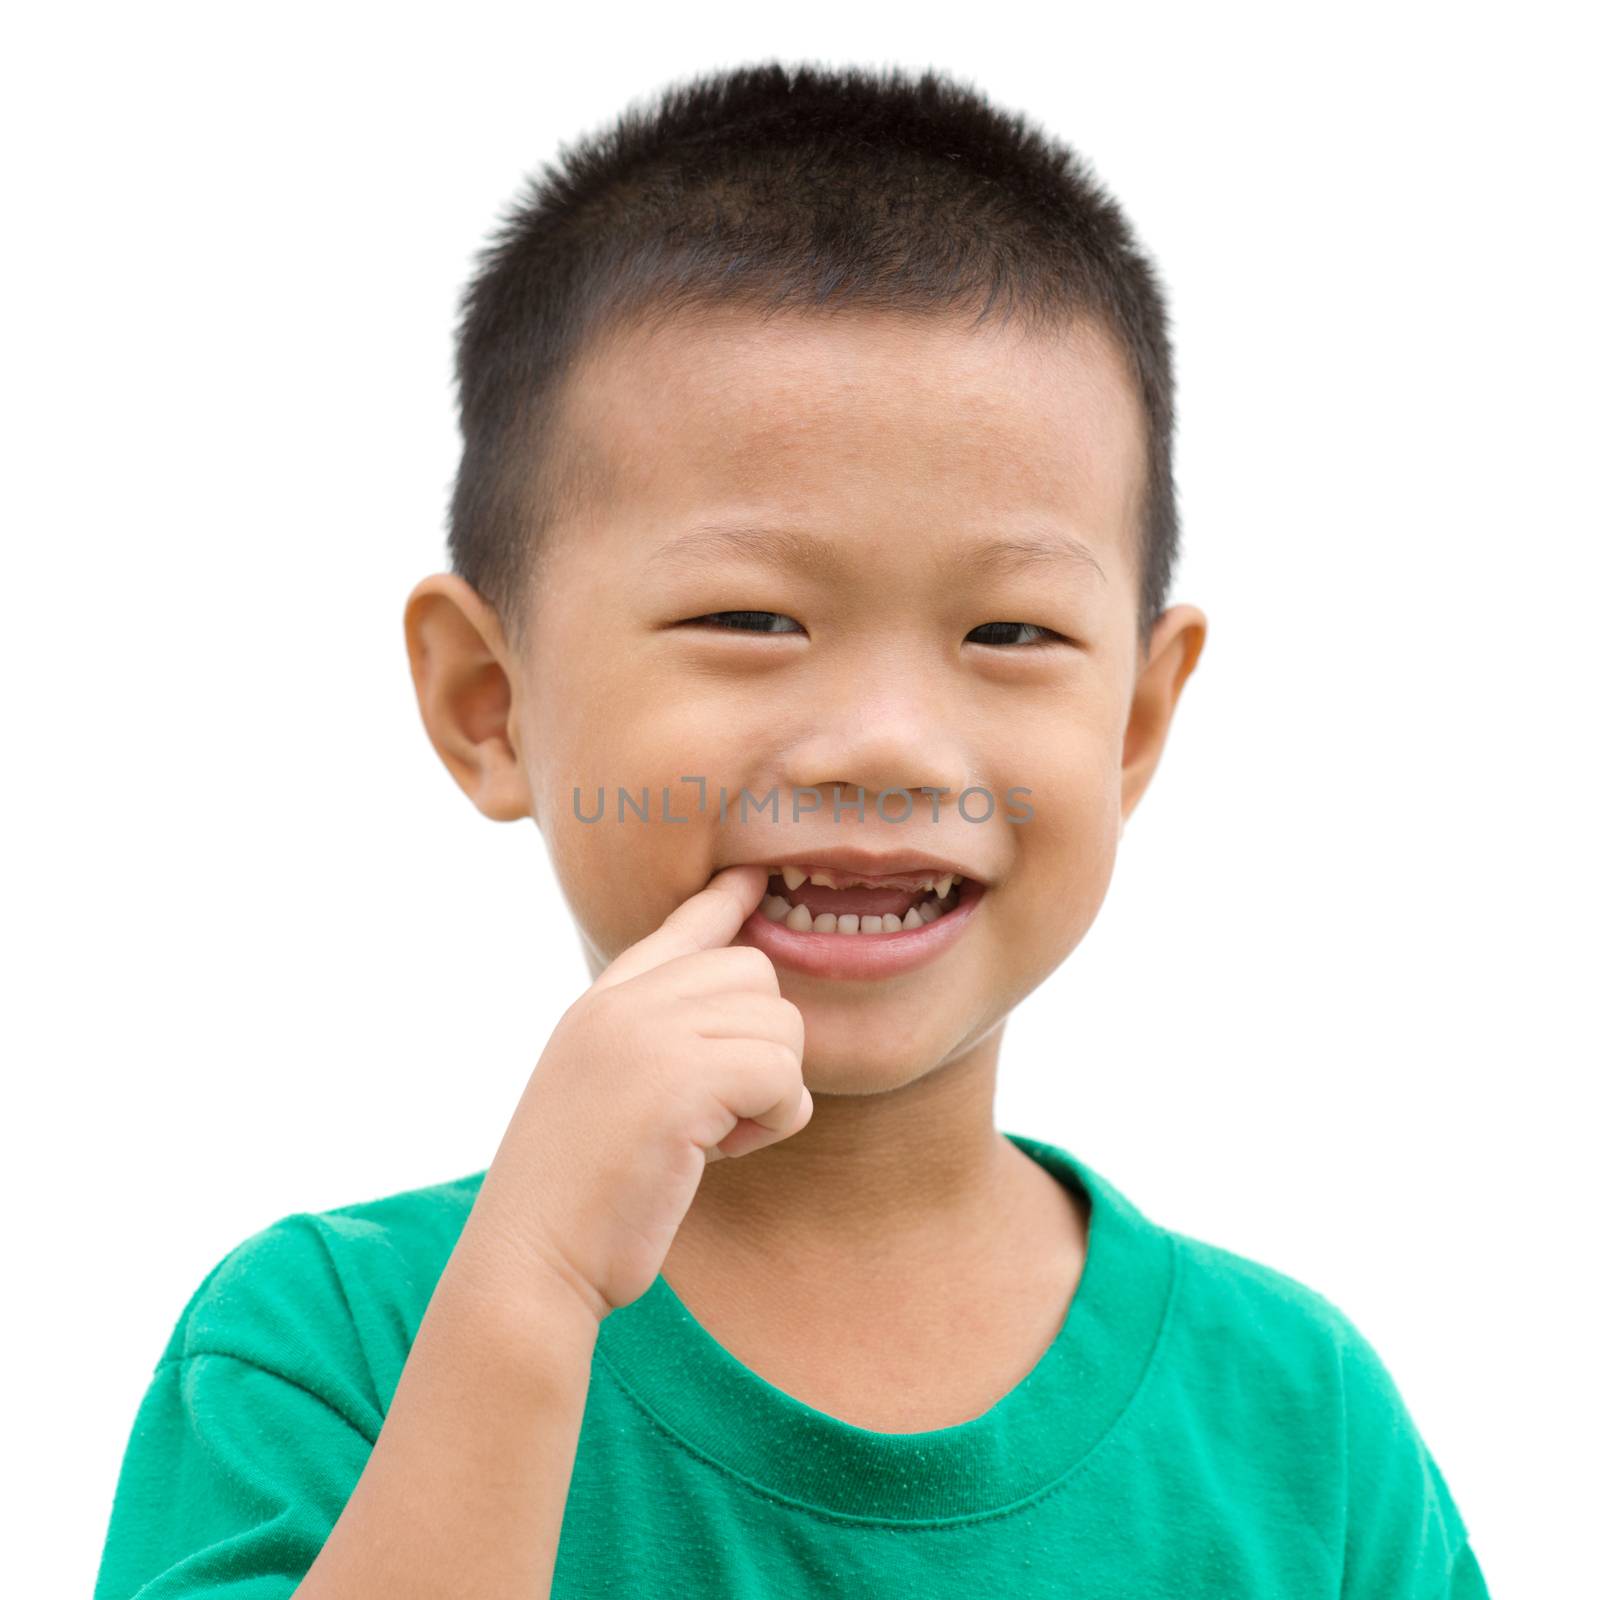 Happy Asian child smiling and pointing his teeth. Portrait of young boy showing body parts isolated on white background.